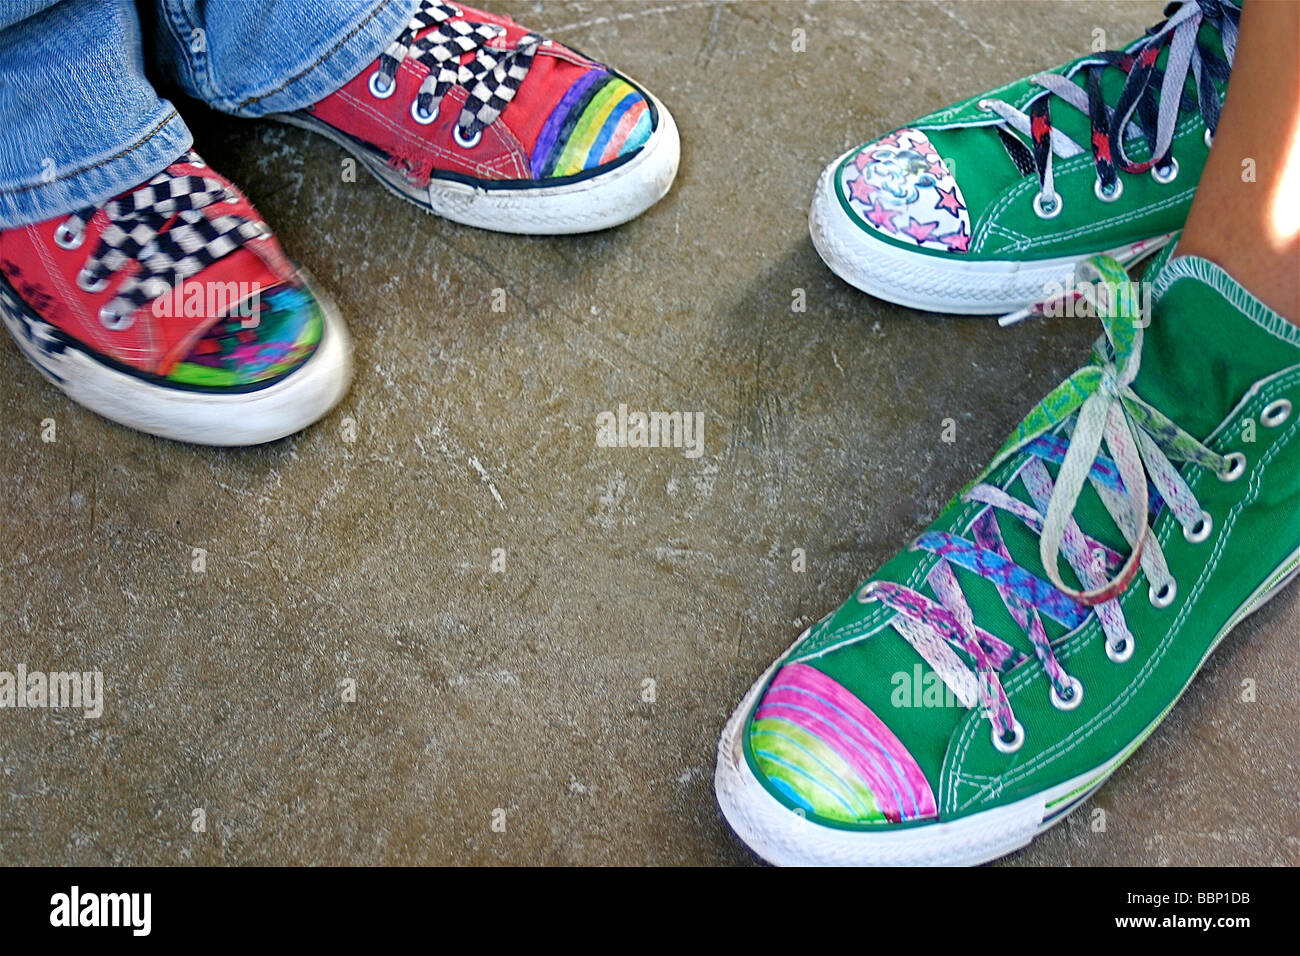 Just hanging around.  Two teenagers with their hand painted tennis shoes Stock Photo